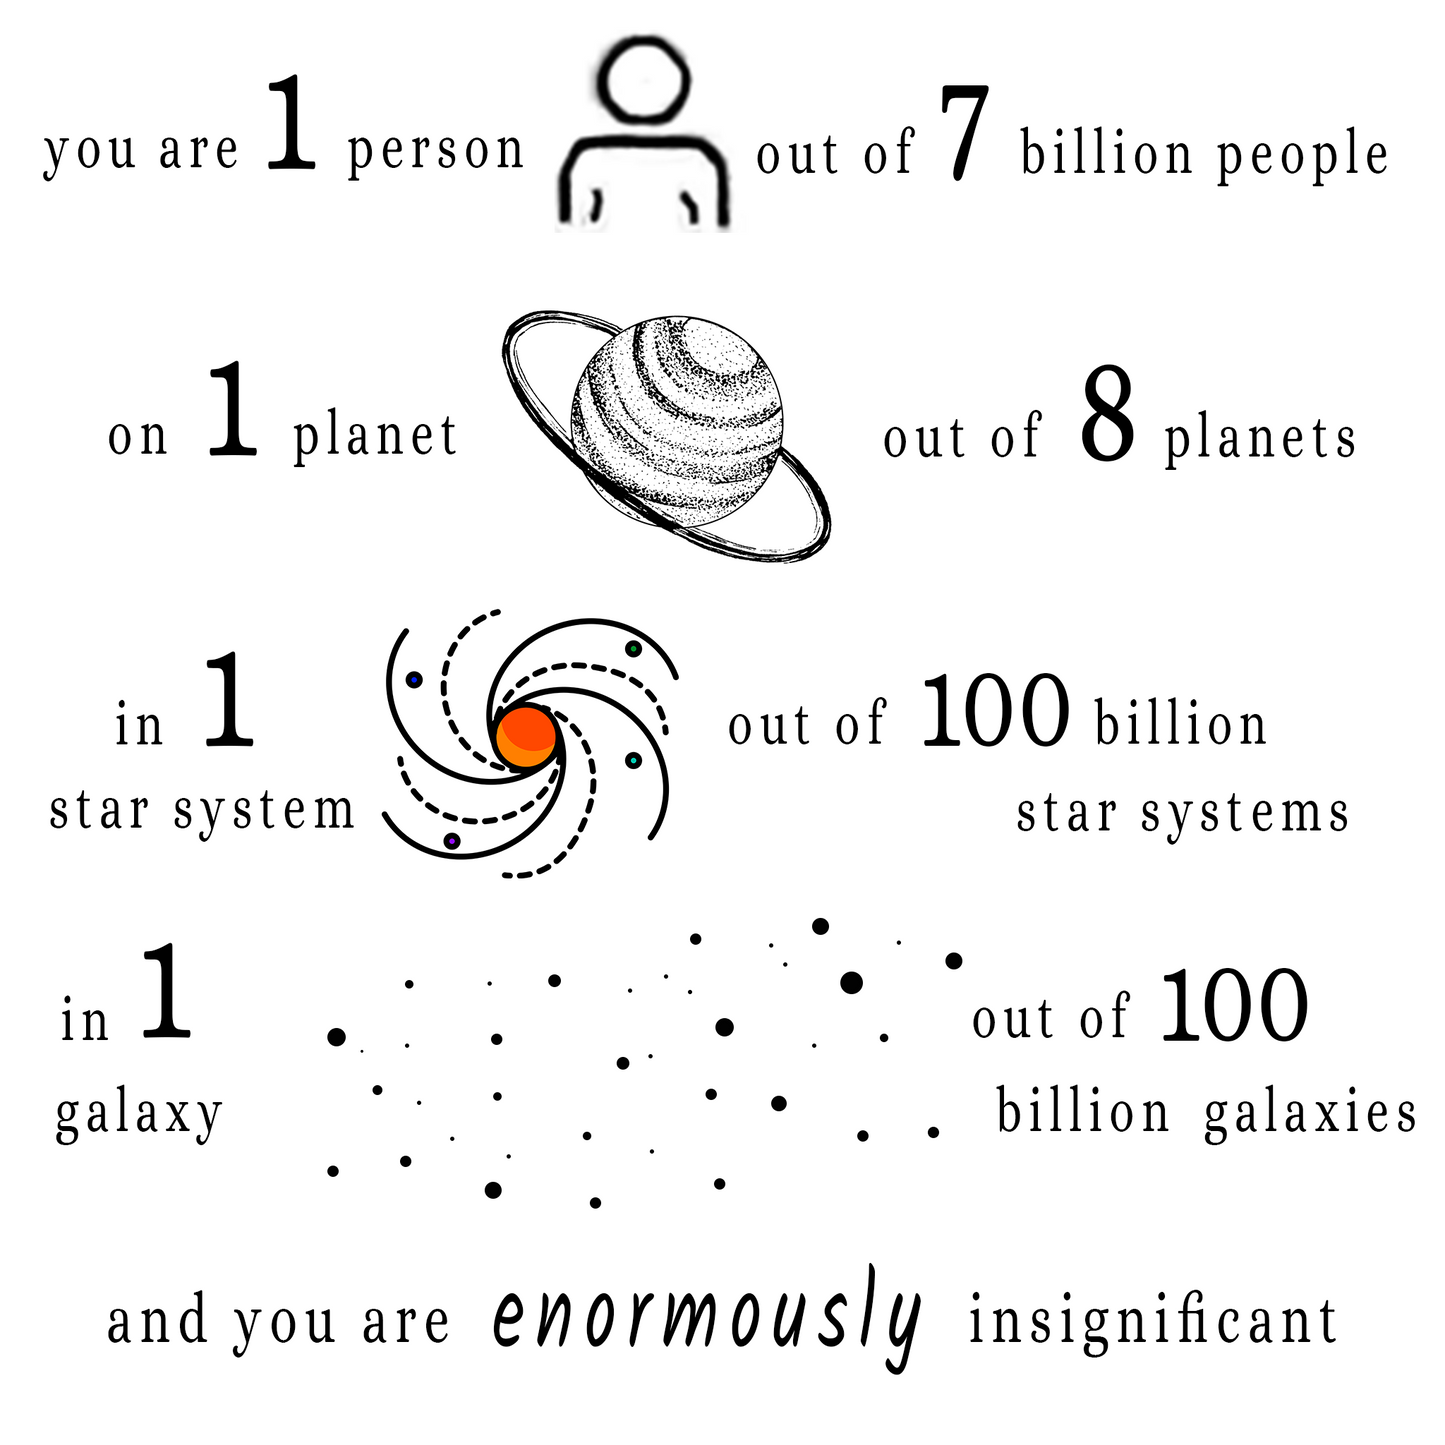 “You are 1 person out of 7 billion people On 1 planet out of 8 planets In 1 star system out of 100 billion star systems In 1 galaxy out of 100 billion galaxies and you are enormously insignificant”